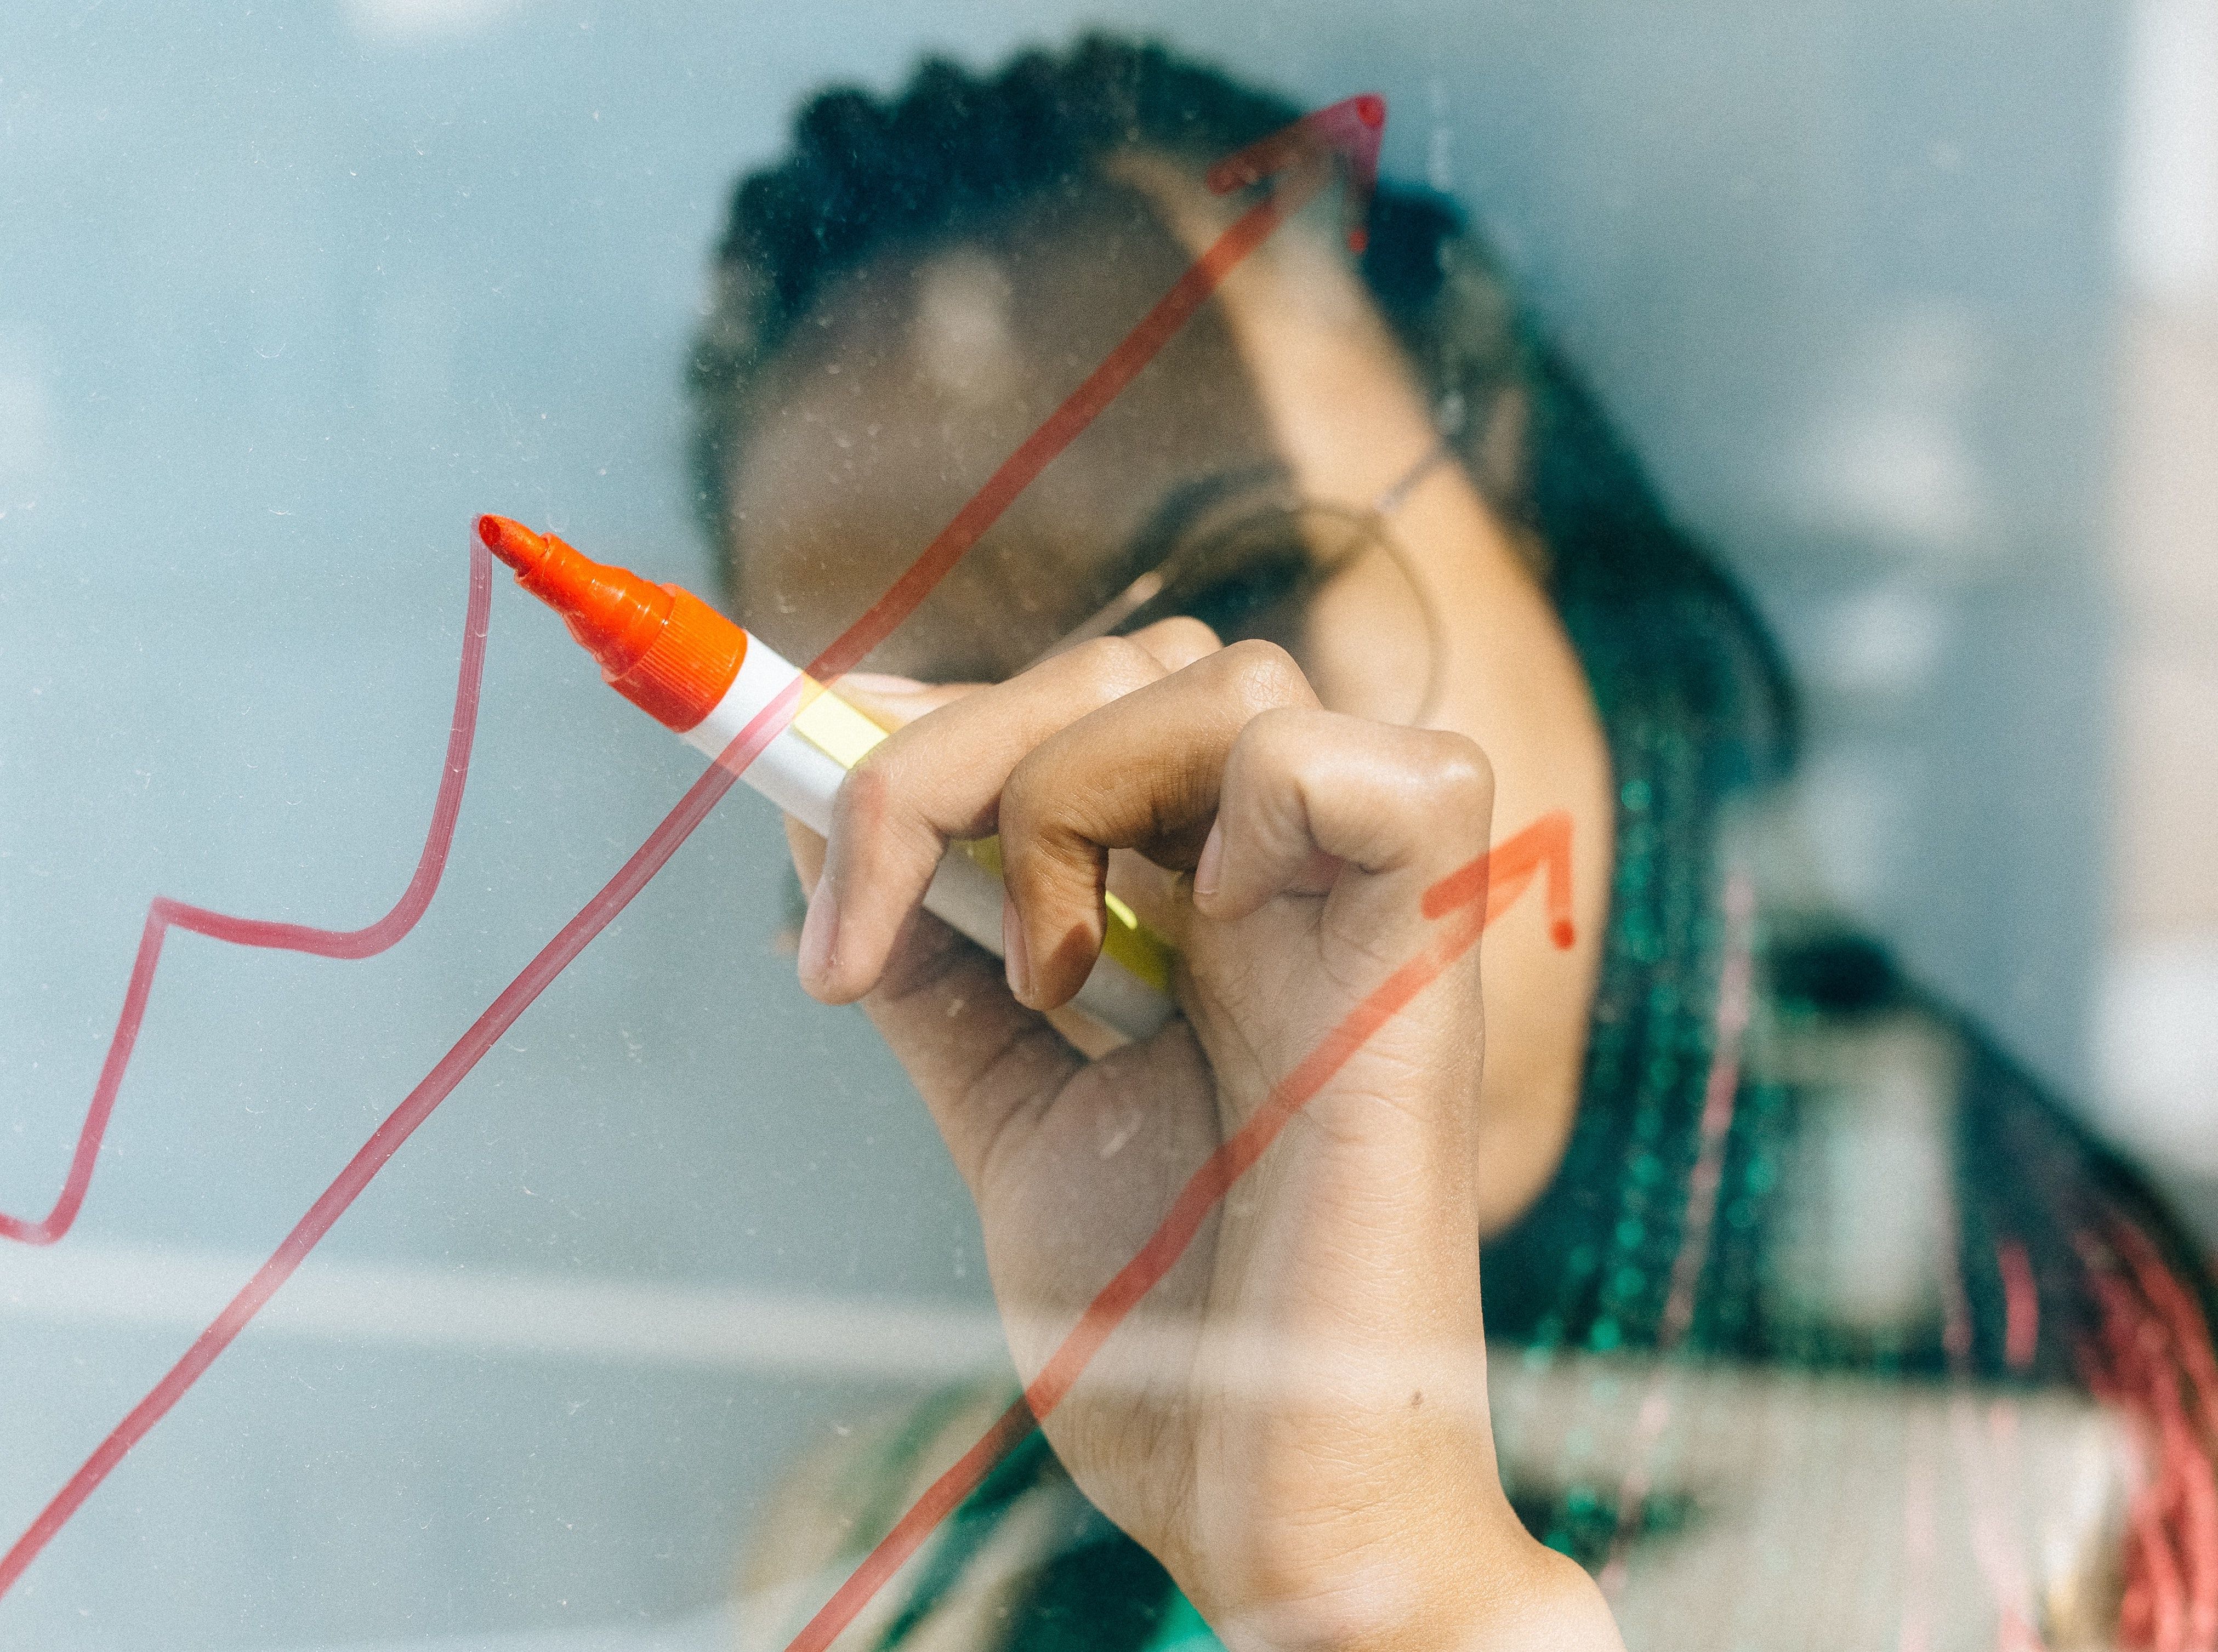 Black woman drawing a graph on a whiteboard